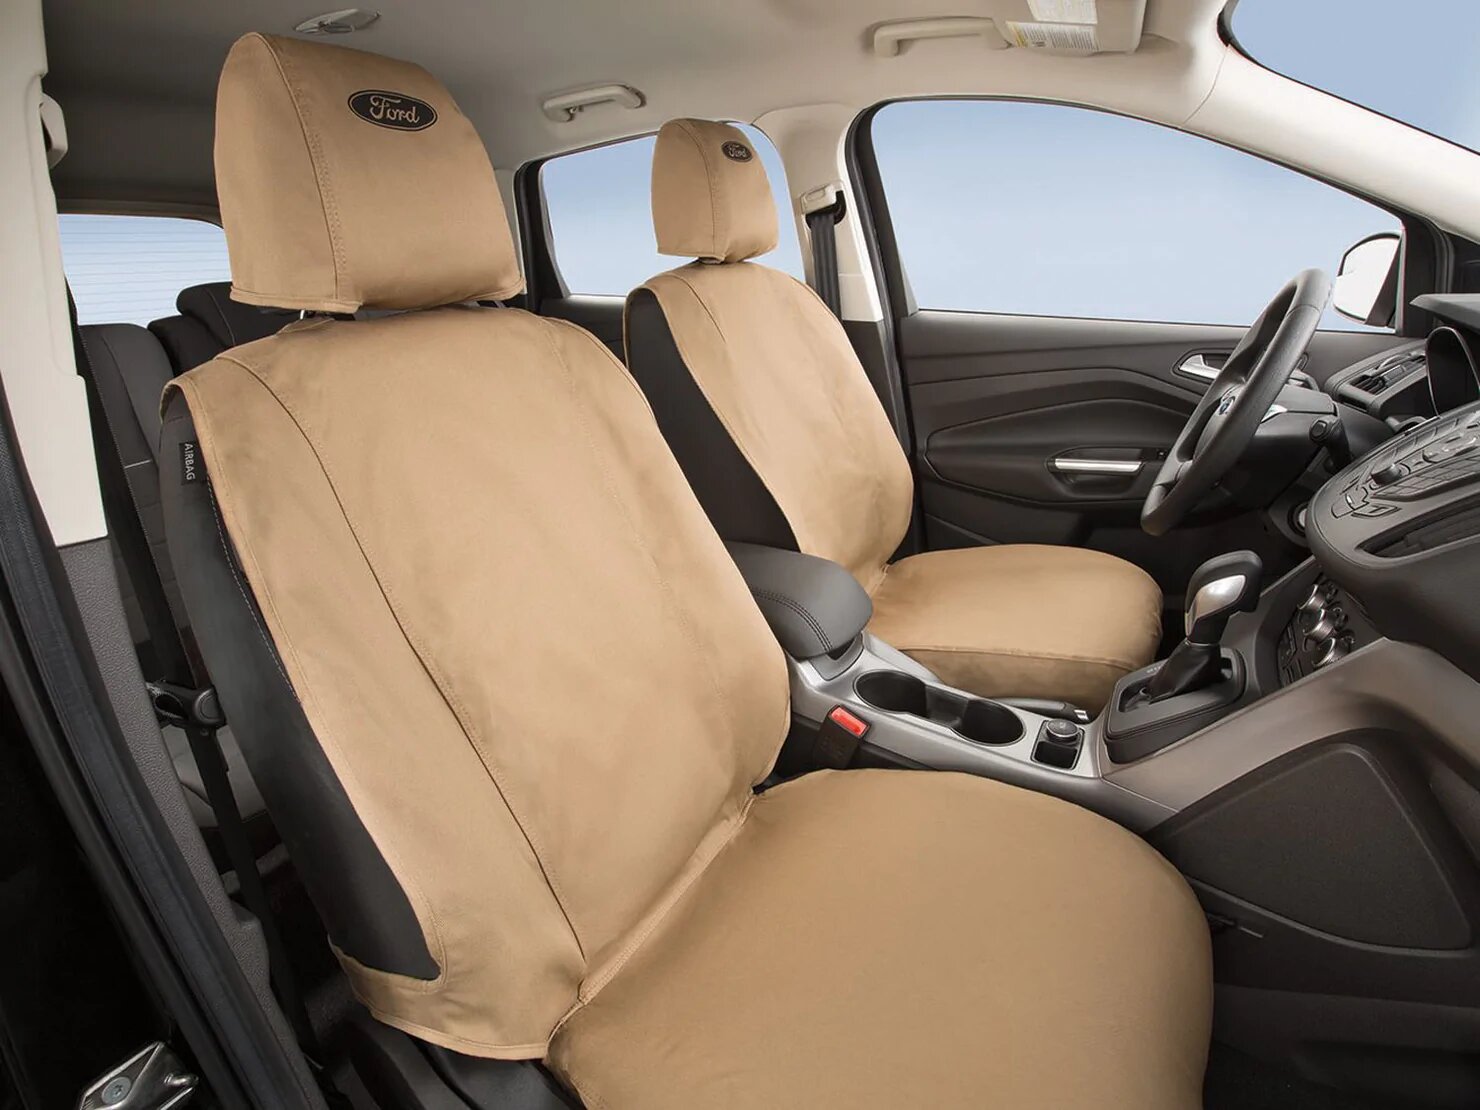 Covercraft Seat Covers